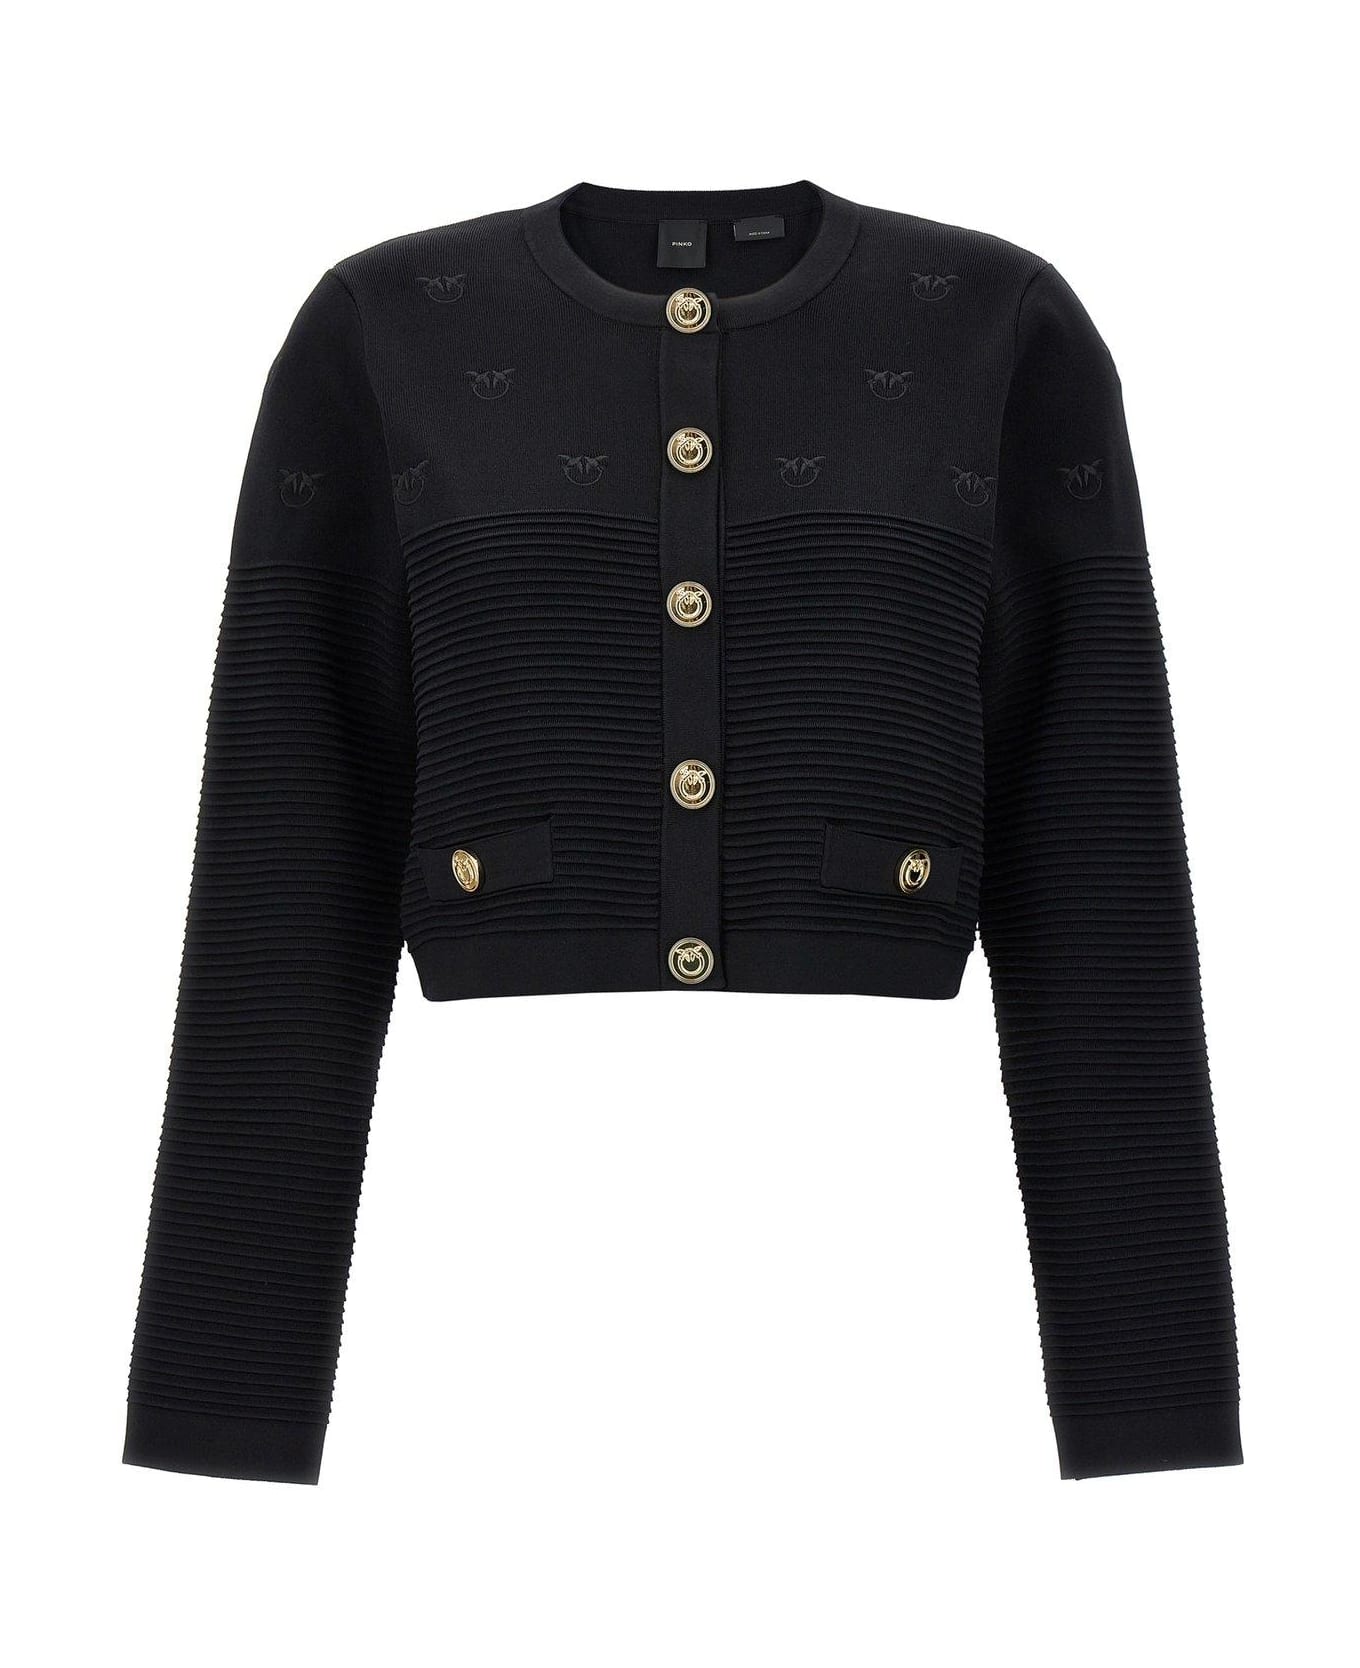 Pinko Love Birds Embroidered Cropped Cardigan - Black